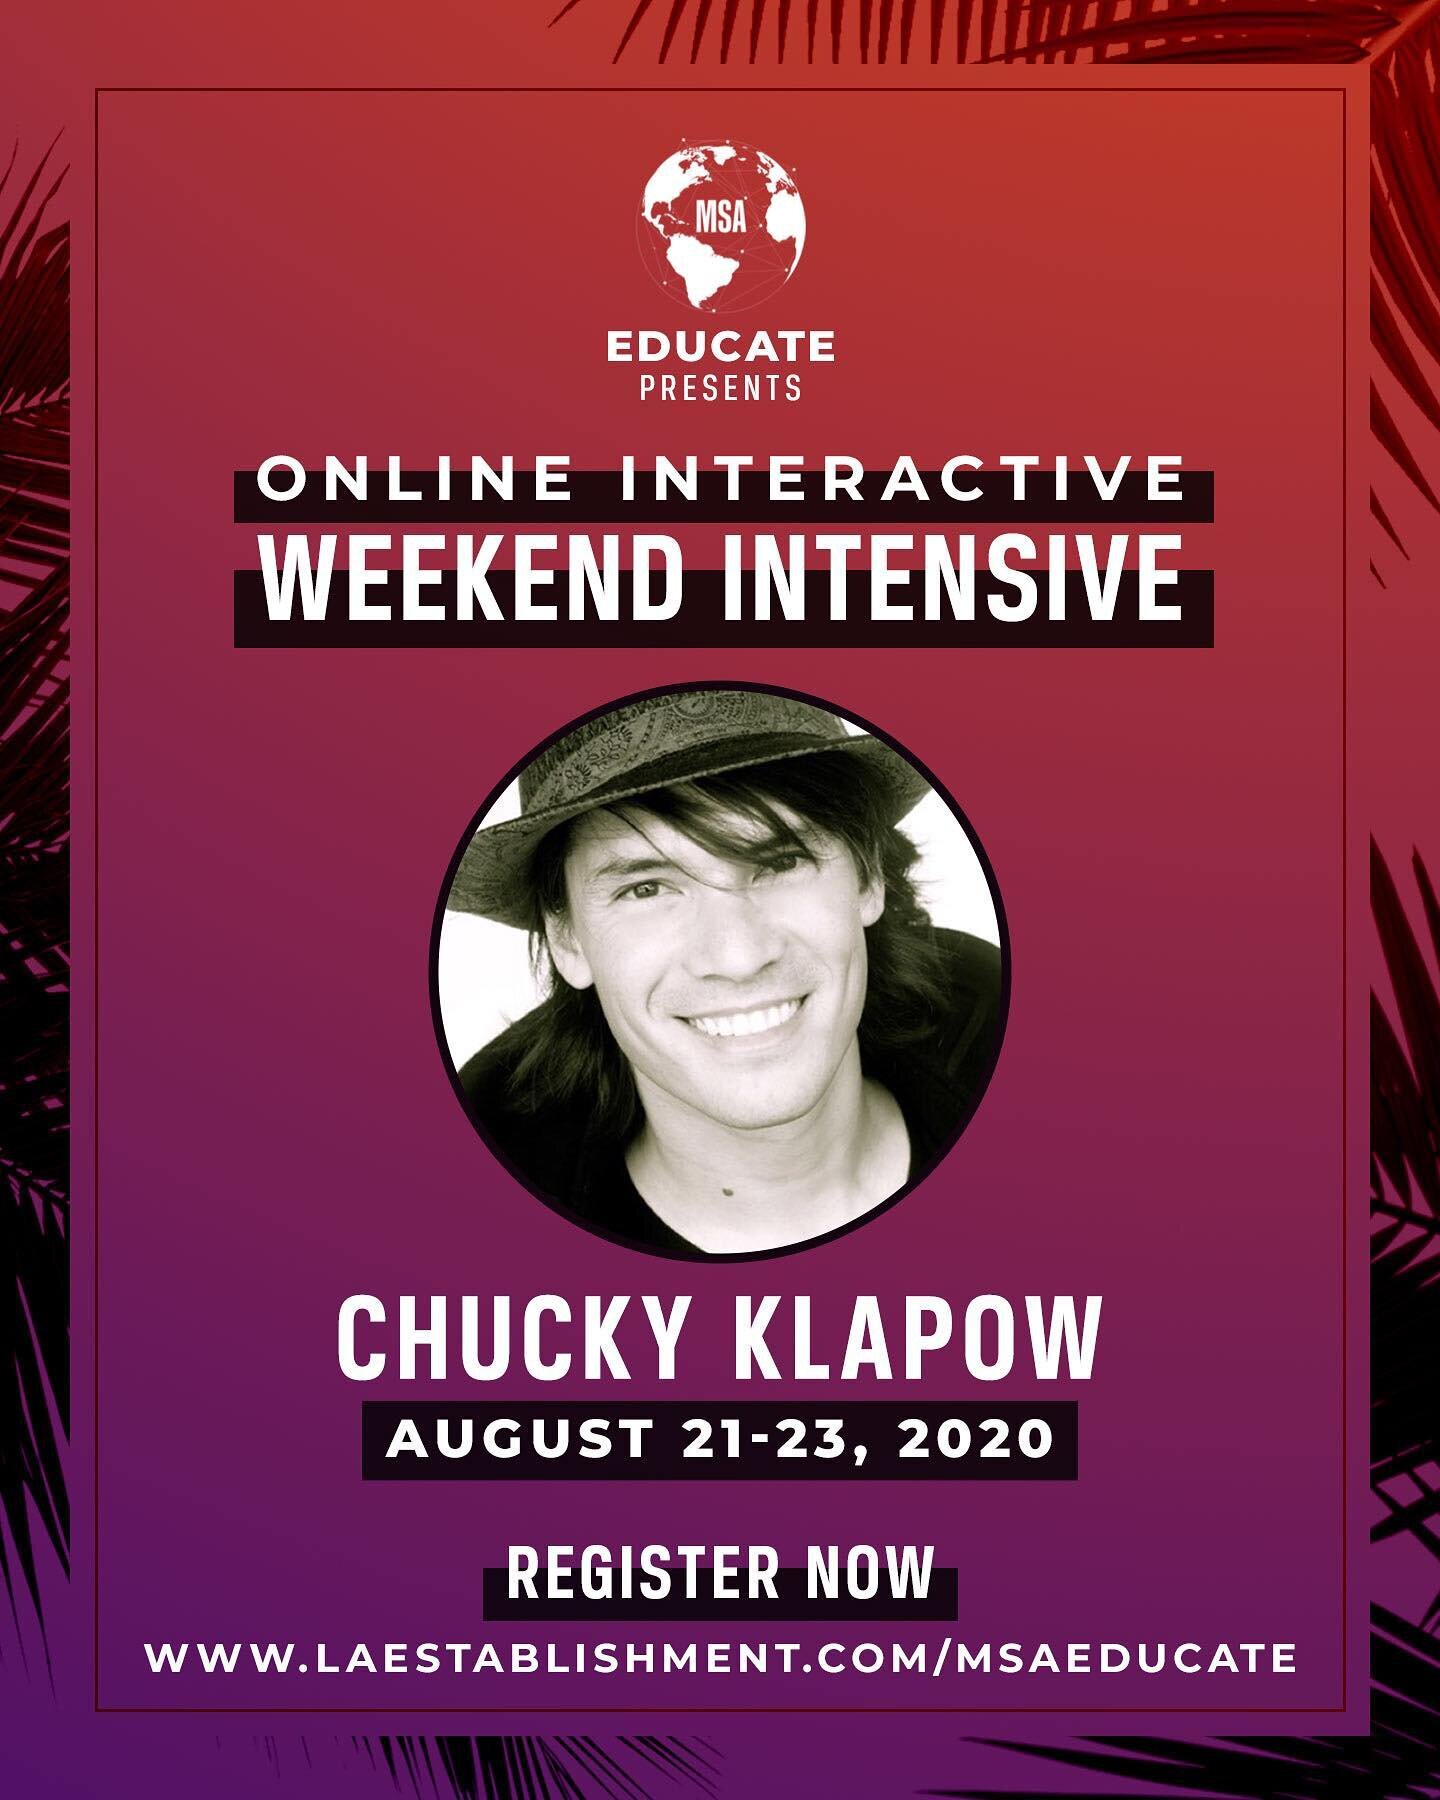 Train with @chuckyklapow and the rest of our incredible @MSA agency educators starting TOMORROW at the Weekend Intensive! Only a few spots available!